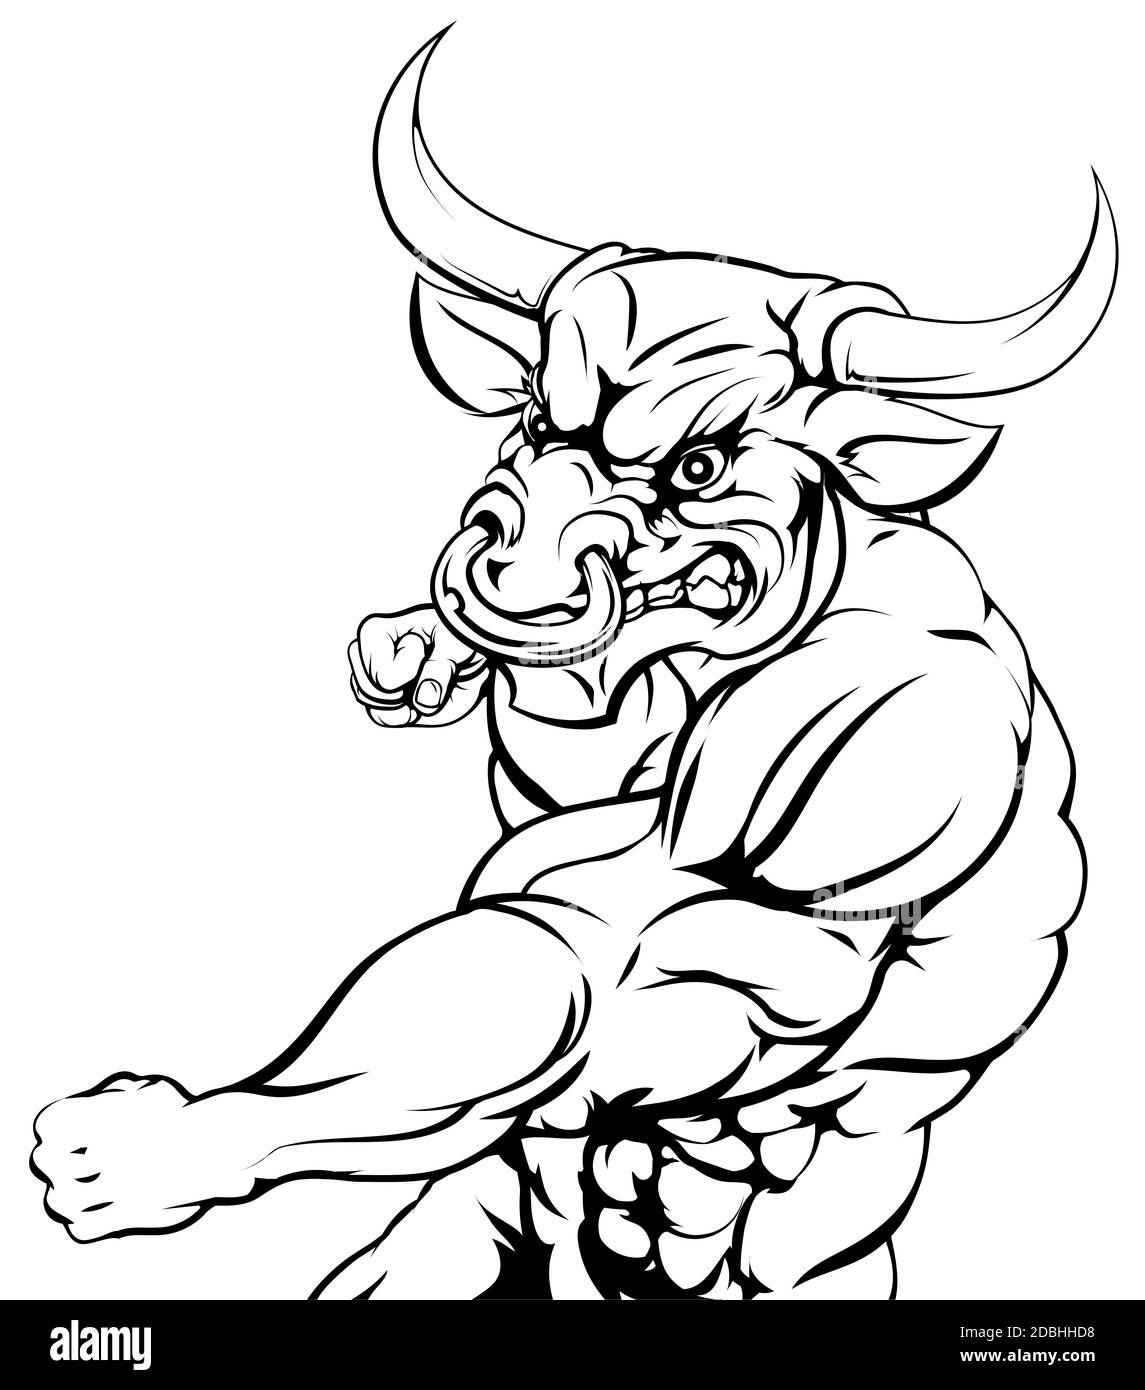 An illustration of a mean looking bull animal sports mascot punching Stock Photo